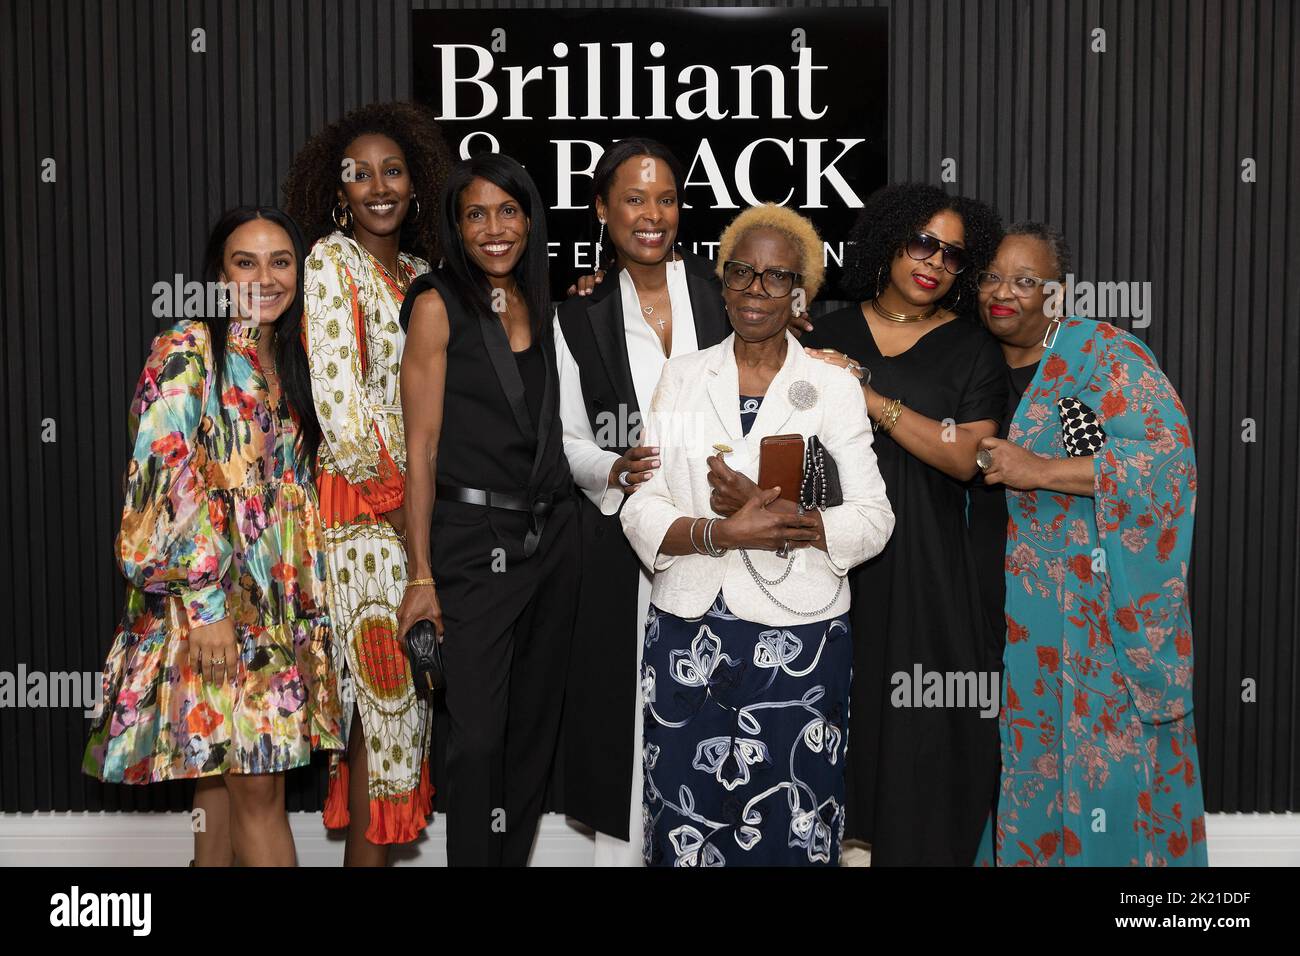 (left to right) Maggi Simpson, Sewit Sium, Gina Love, Vania Leles, Jariet Oloyé, Lorraine West and Karen Smith attend the launch of Brilliant and Black, a new selling exhibition showcasing specially commissioned jewellery by black designers, at Sotheby's in London Picture date: Wednesday September 21, 2022. Stock Photo